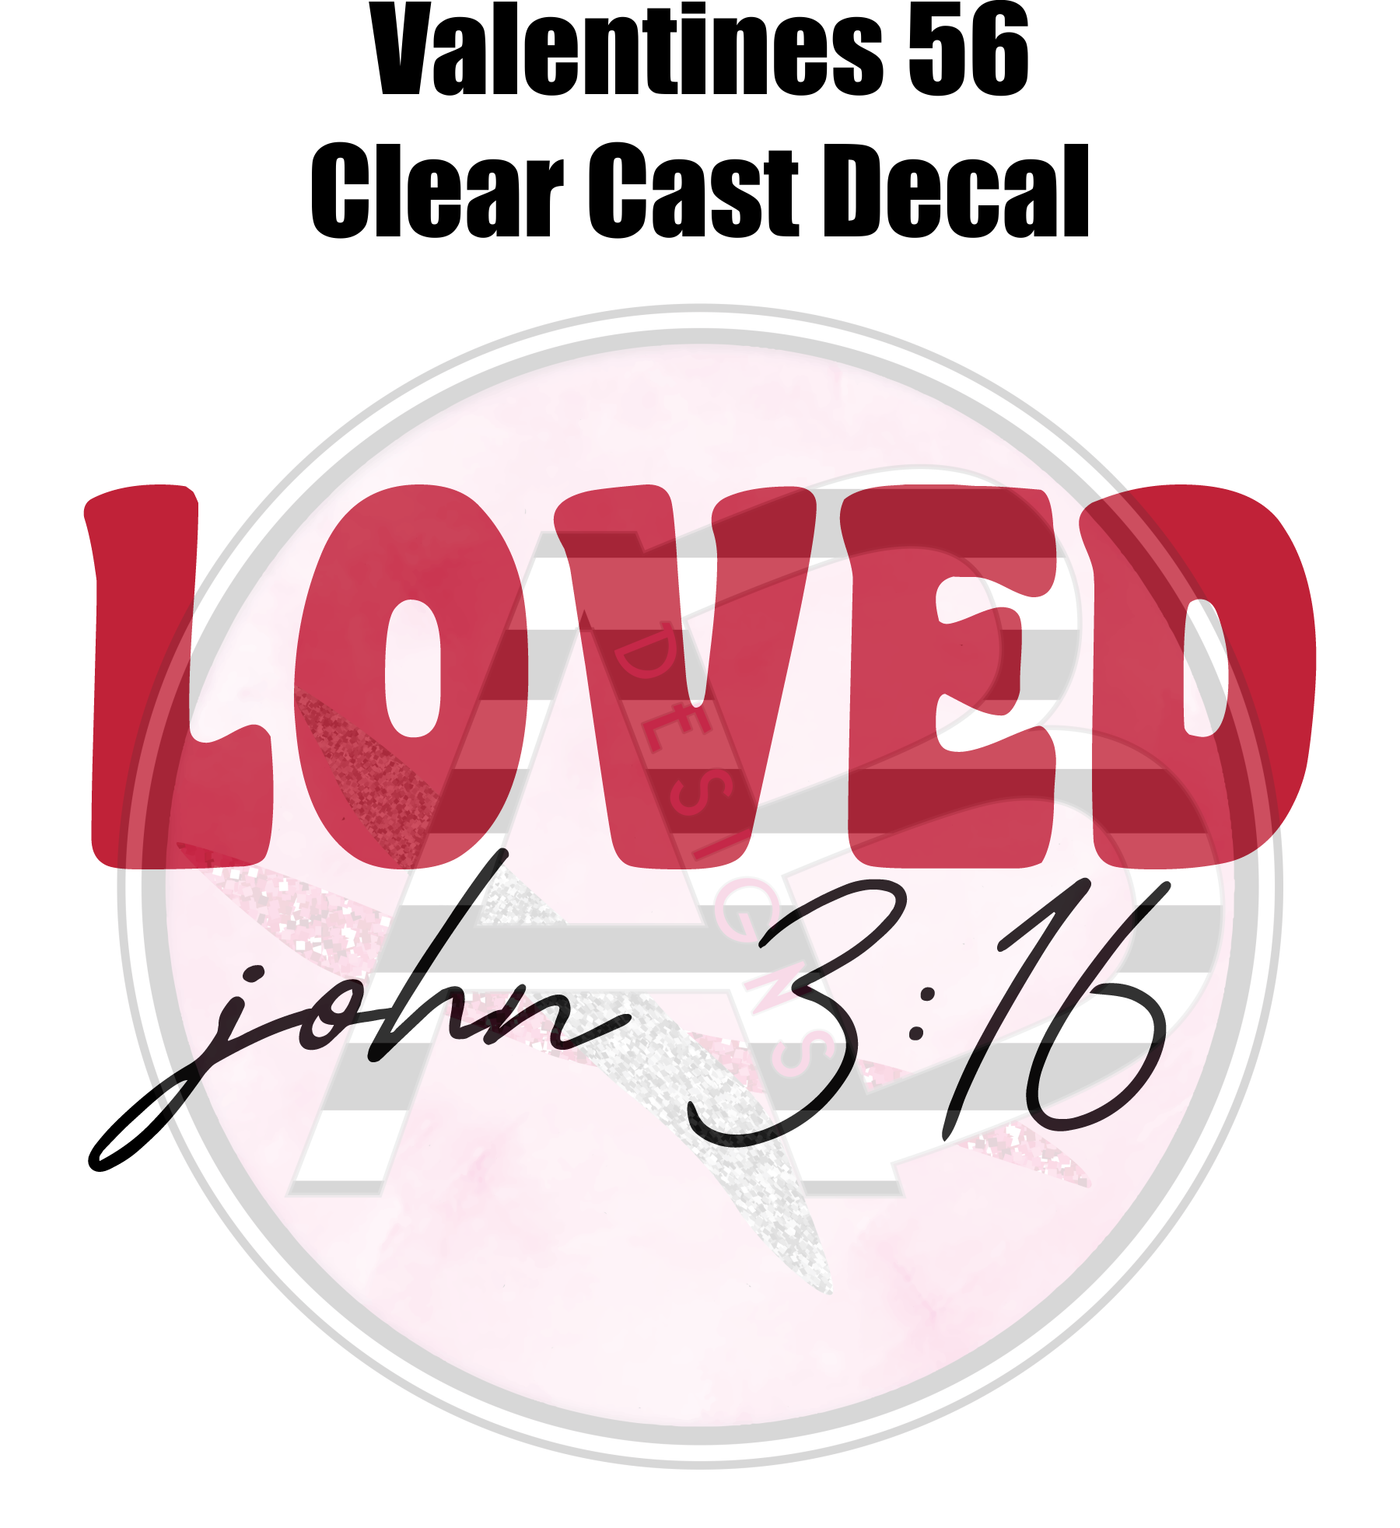 Valentines 56 - Clear Cast Decal